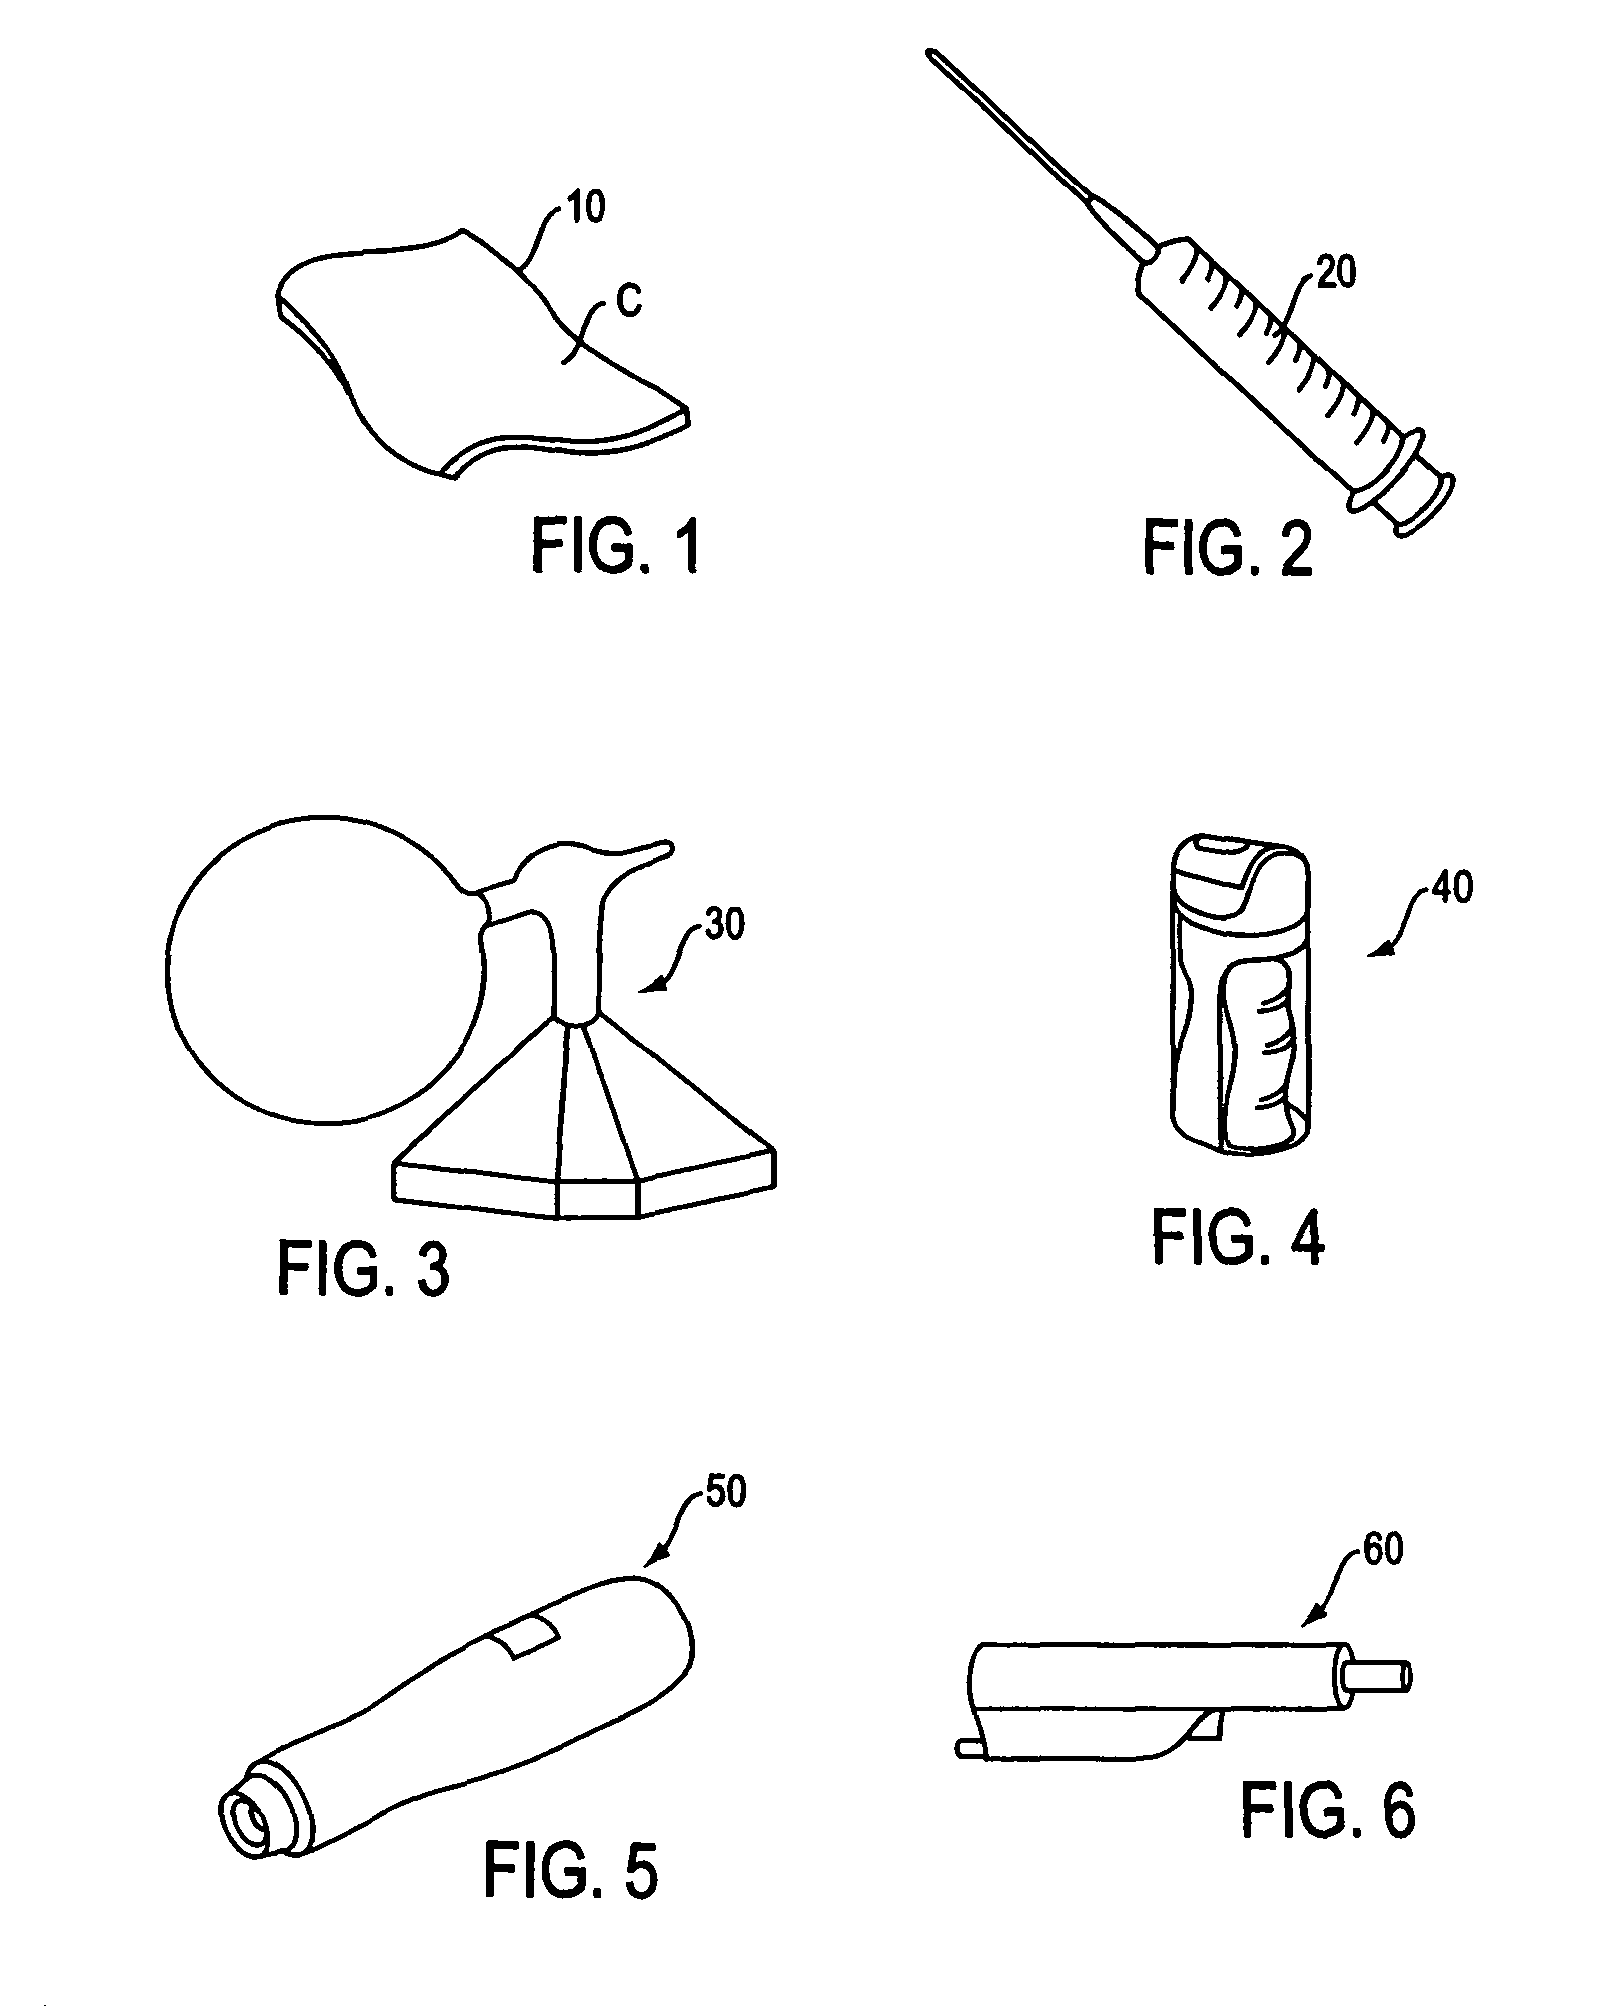 Dehydrated hydrogel precursor-based, tissue adherent compositions and methods of use